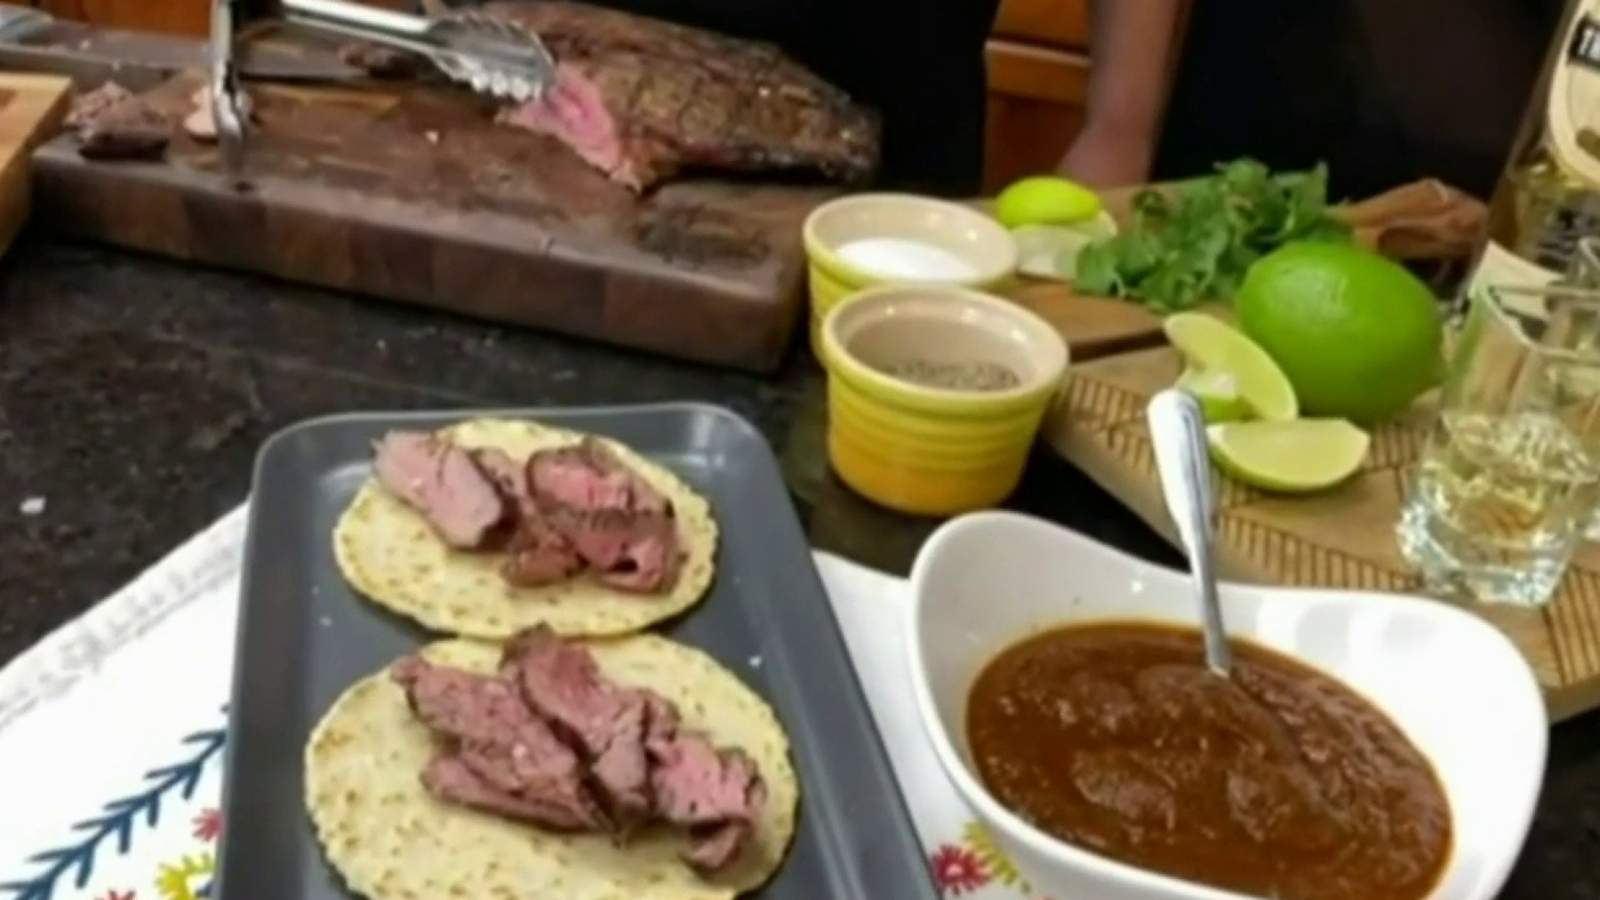 Try this Tequila Lime Marinade recipe on your steak